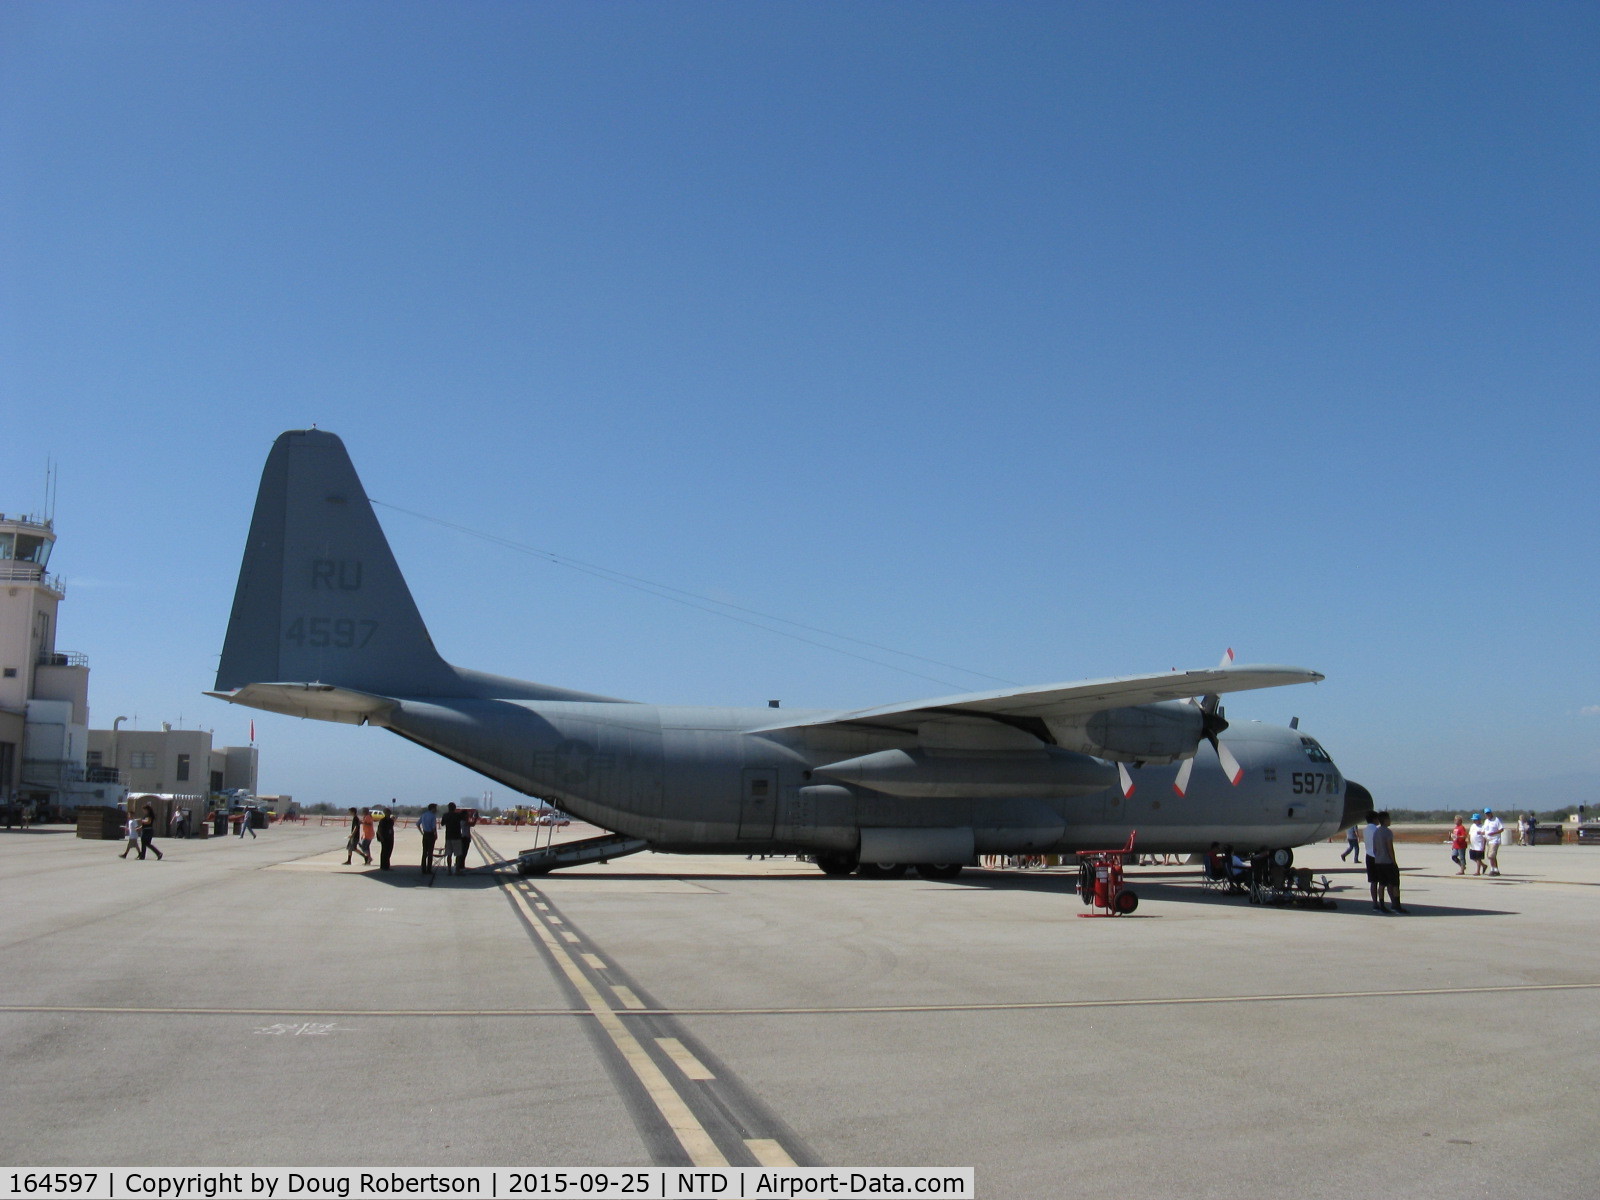 164597, Lockheed KC-130T-30 Hercules C/N 382-5260, Lockheed Martin C-130T-30 HERCULES conversion from KC-130T-30, four Rolls Royce AE 2100D3 Turboprops 4,637 shp each. Of VX-30 for NTD NAWS missile test range clearance, security, ship safety & refueling.